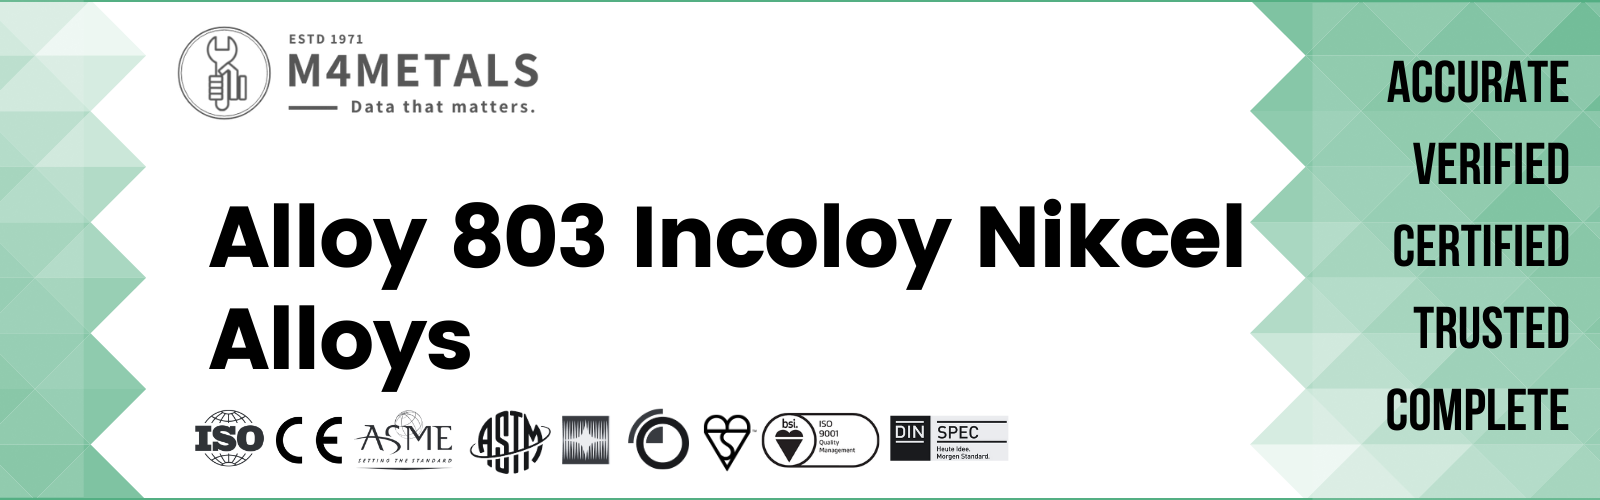 Incoloy Alloy 803